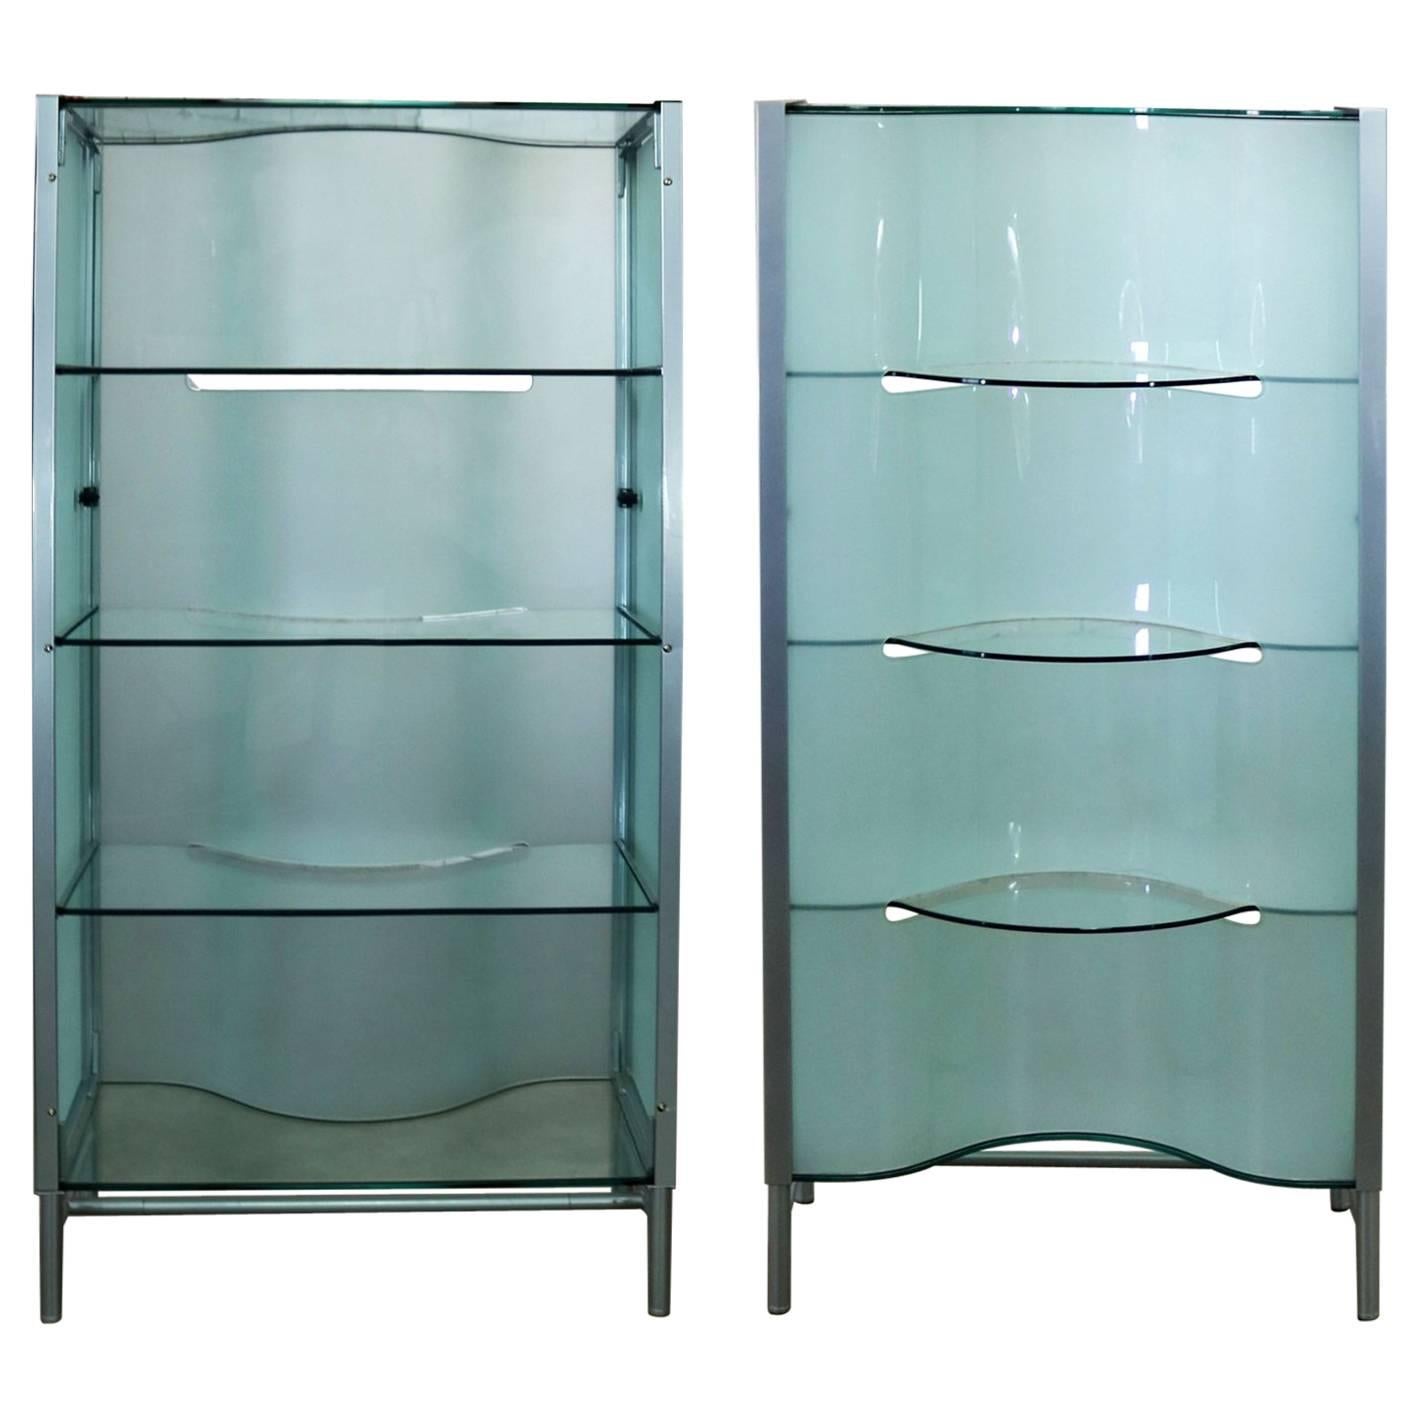 Dual Sided Glass and Metal Enclosed Display Vitrine Étagère Cabinet Room Divider